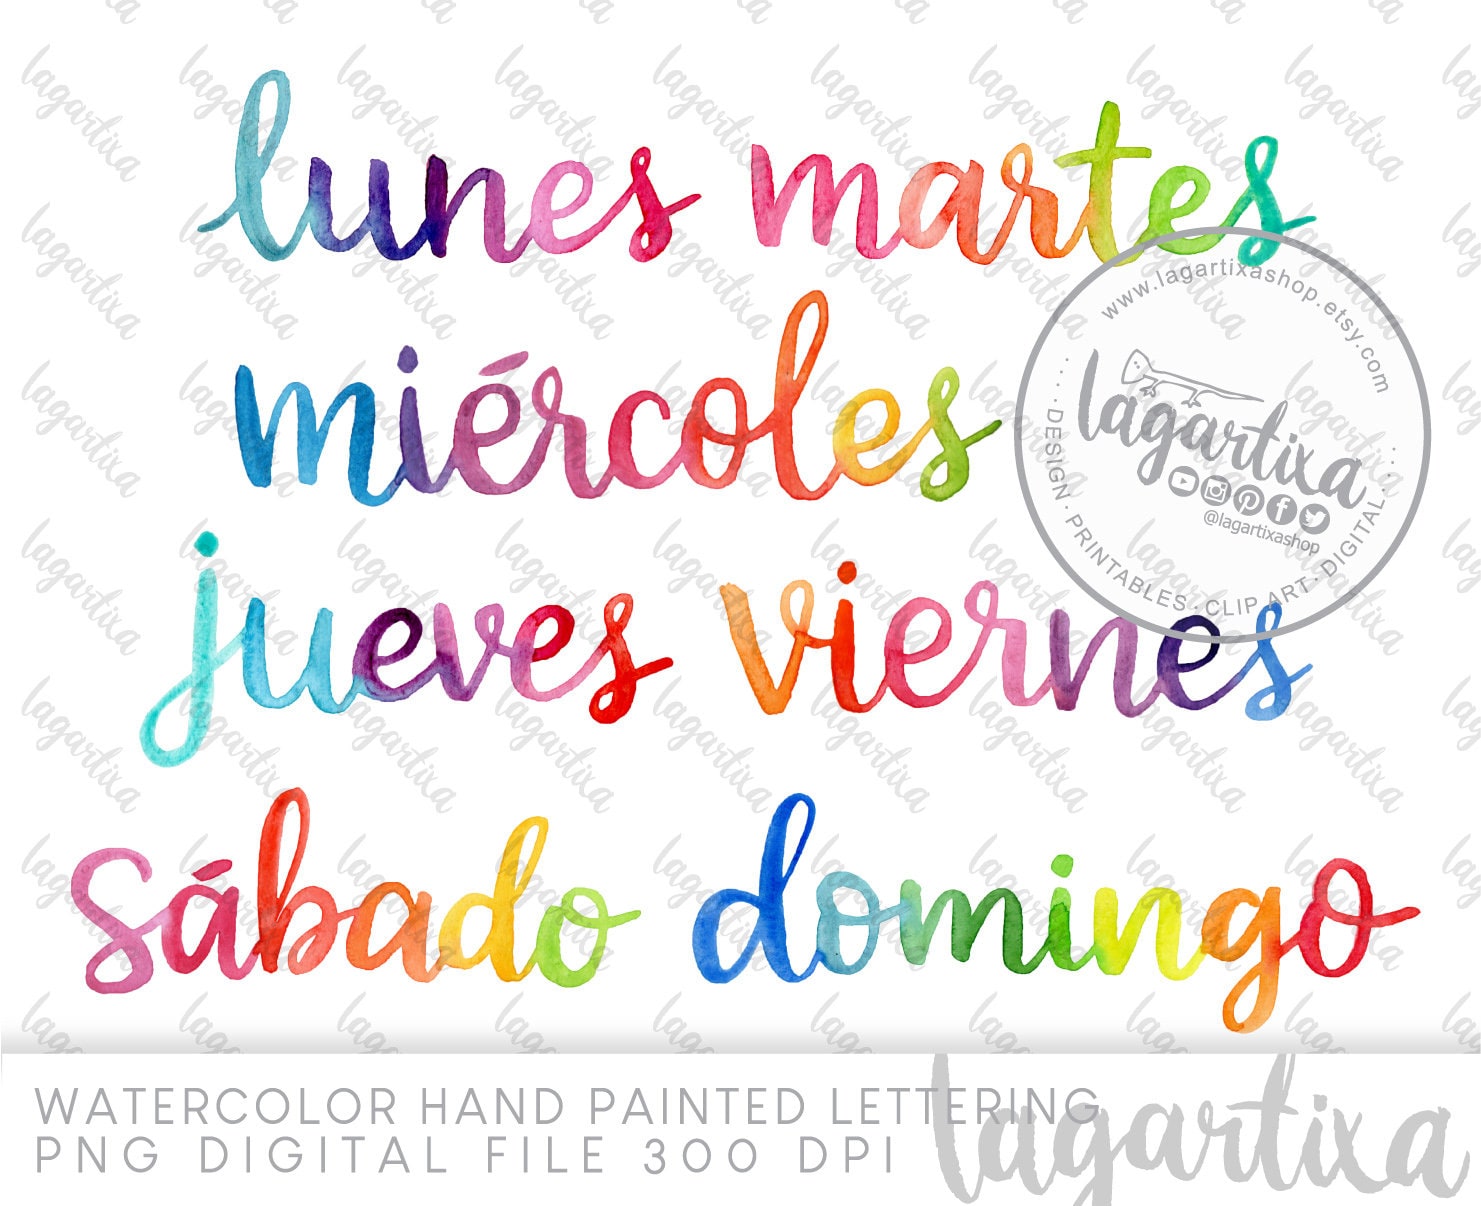 Wednesday Day Week Spanish Hand Drawn Stock Vector (Royalty Free)  1138510445